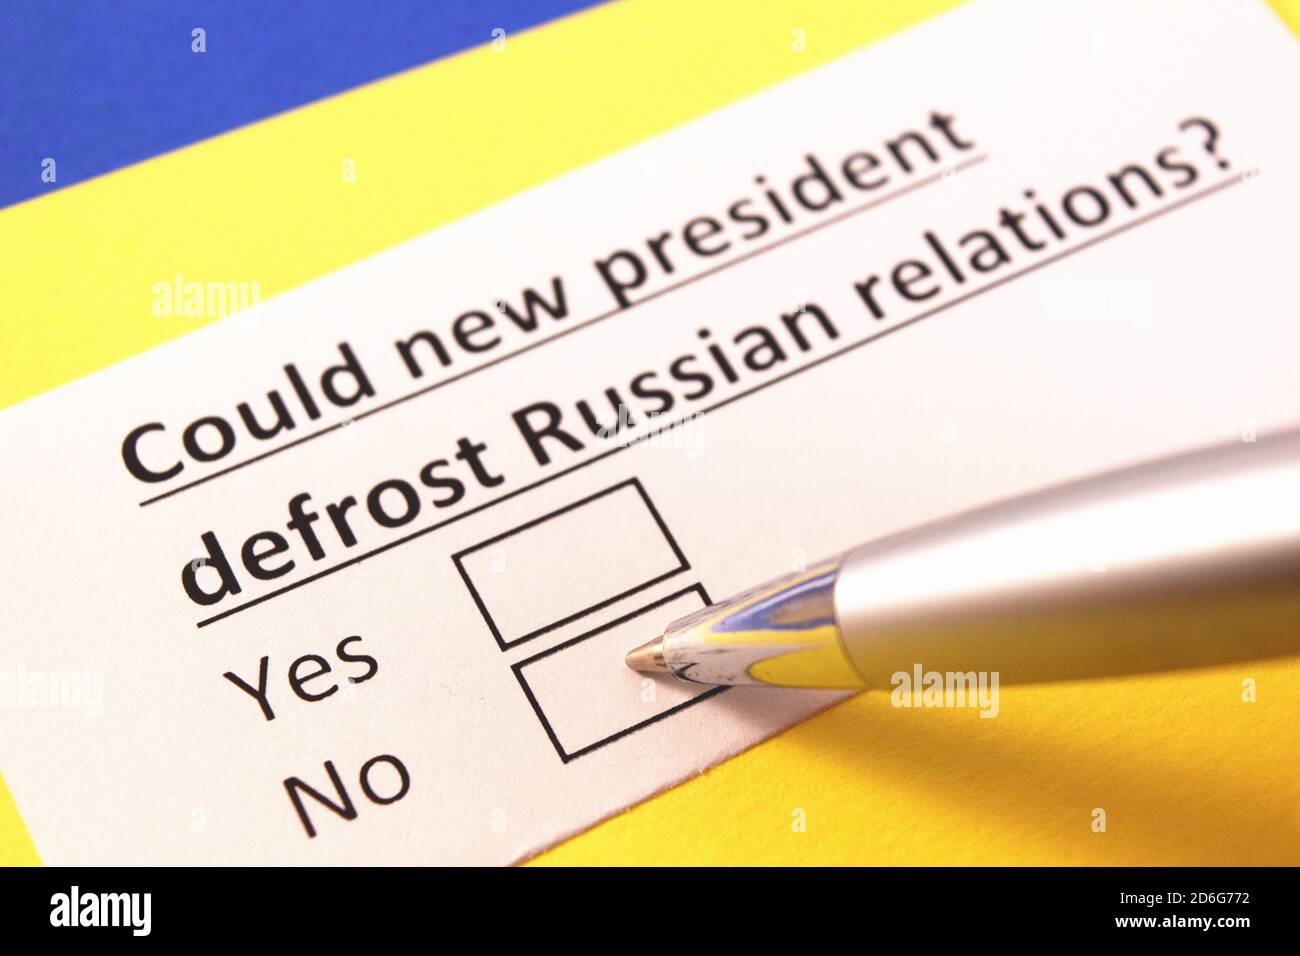 Could new president defrost Russian relations? Yes or no? Stock Photo